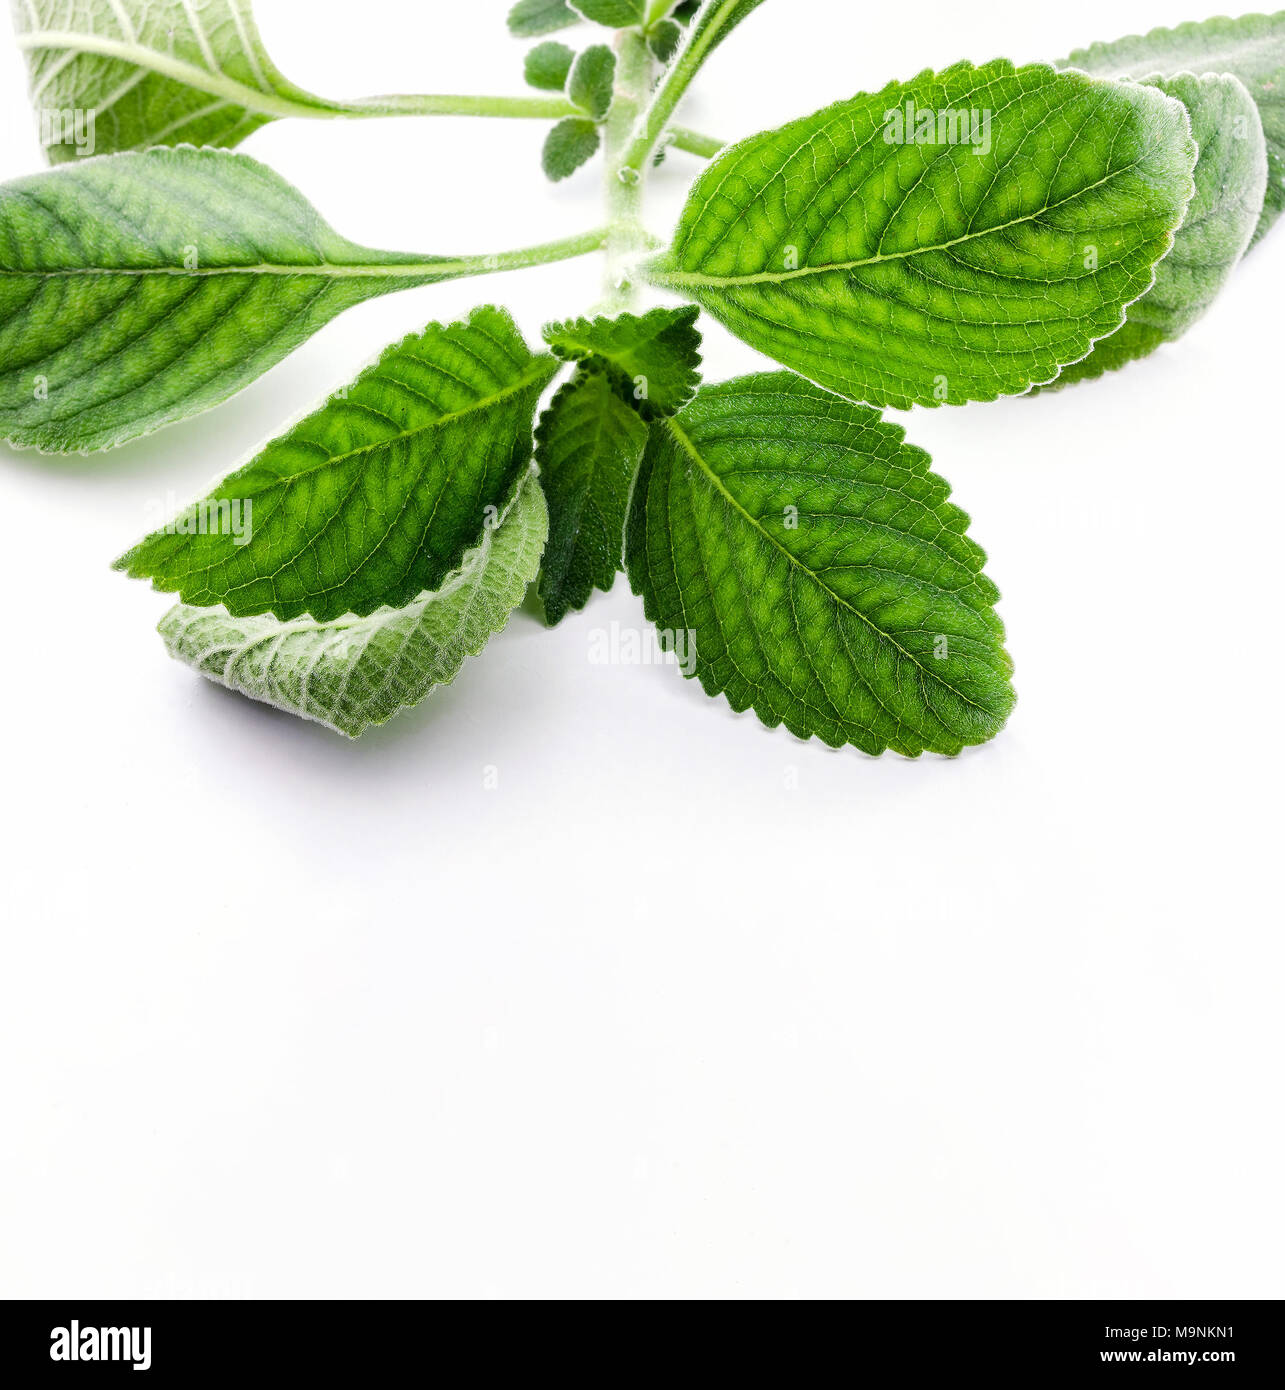 Boldo leaf: branch of a green plant called Boldo da Terra. Plant used to make tea and medicinal products. Plant isolated on white. Stock Photo